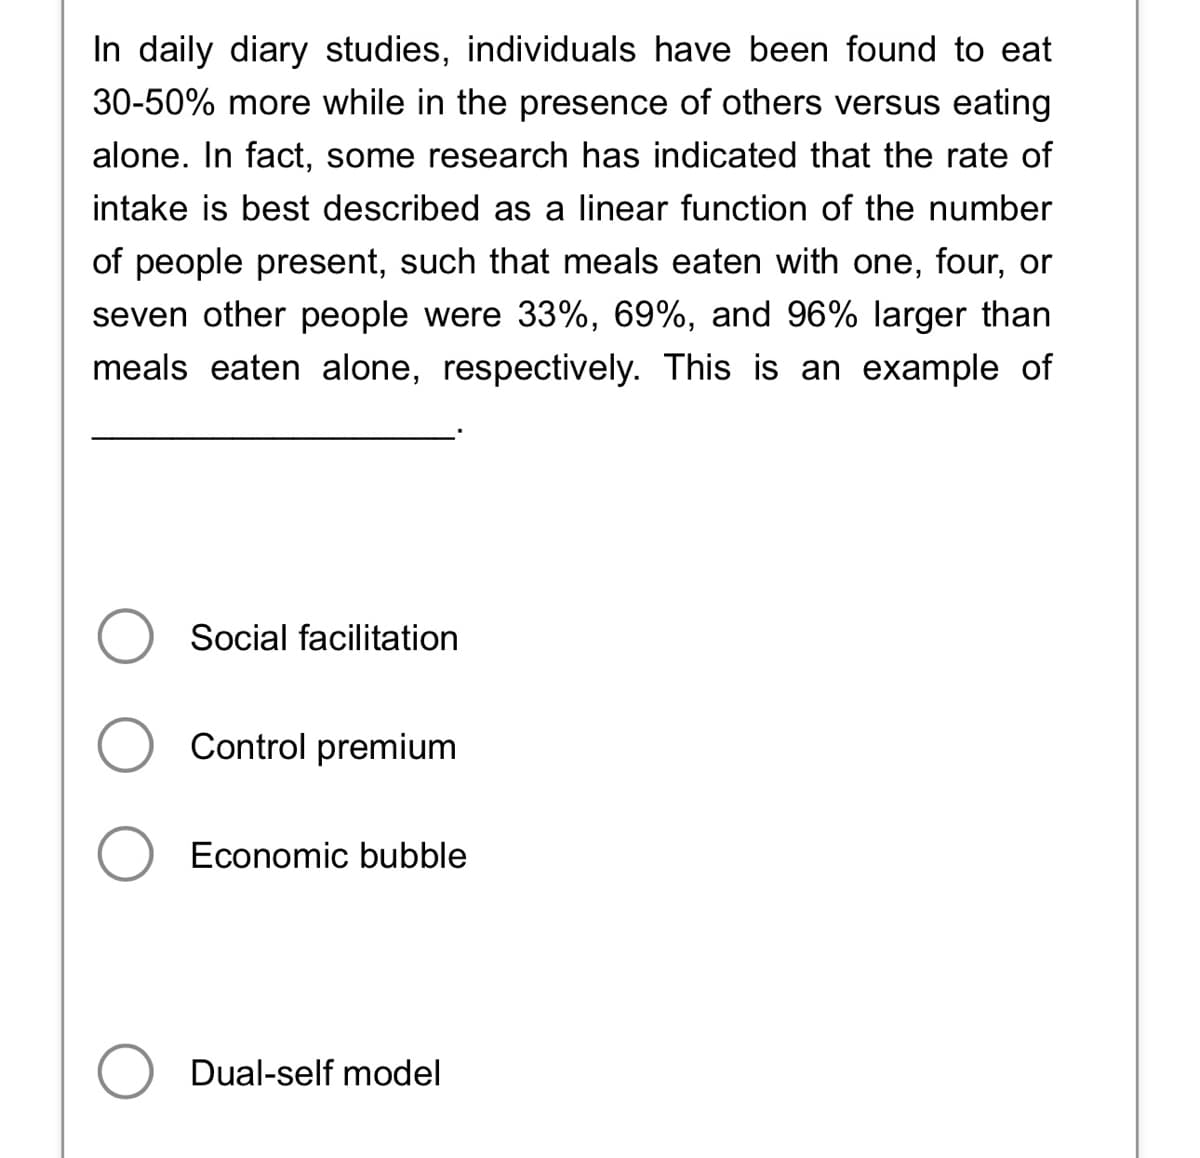 In daily diary studies, individuals have been found to eat
30-50% more while in the presence of others versus eating
alone. In fact, some research has indicated that the rate of
intake is best described as a linear function of the number
of people present, such that meals eaten with one, four, or
seven other people were 33%, 69%, and 96% larger than
meals eaten alone, respectively. This is an example of
Social facilitation
O Control premium
Economic bubble
Dual-self model